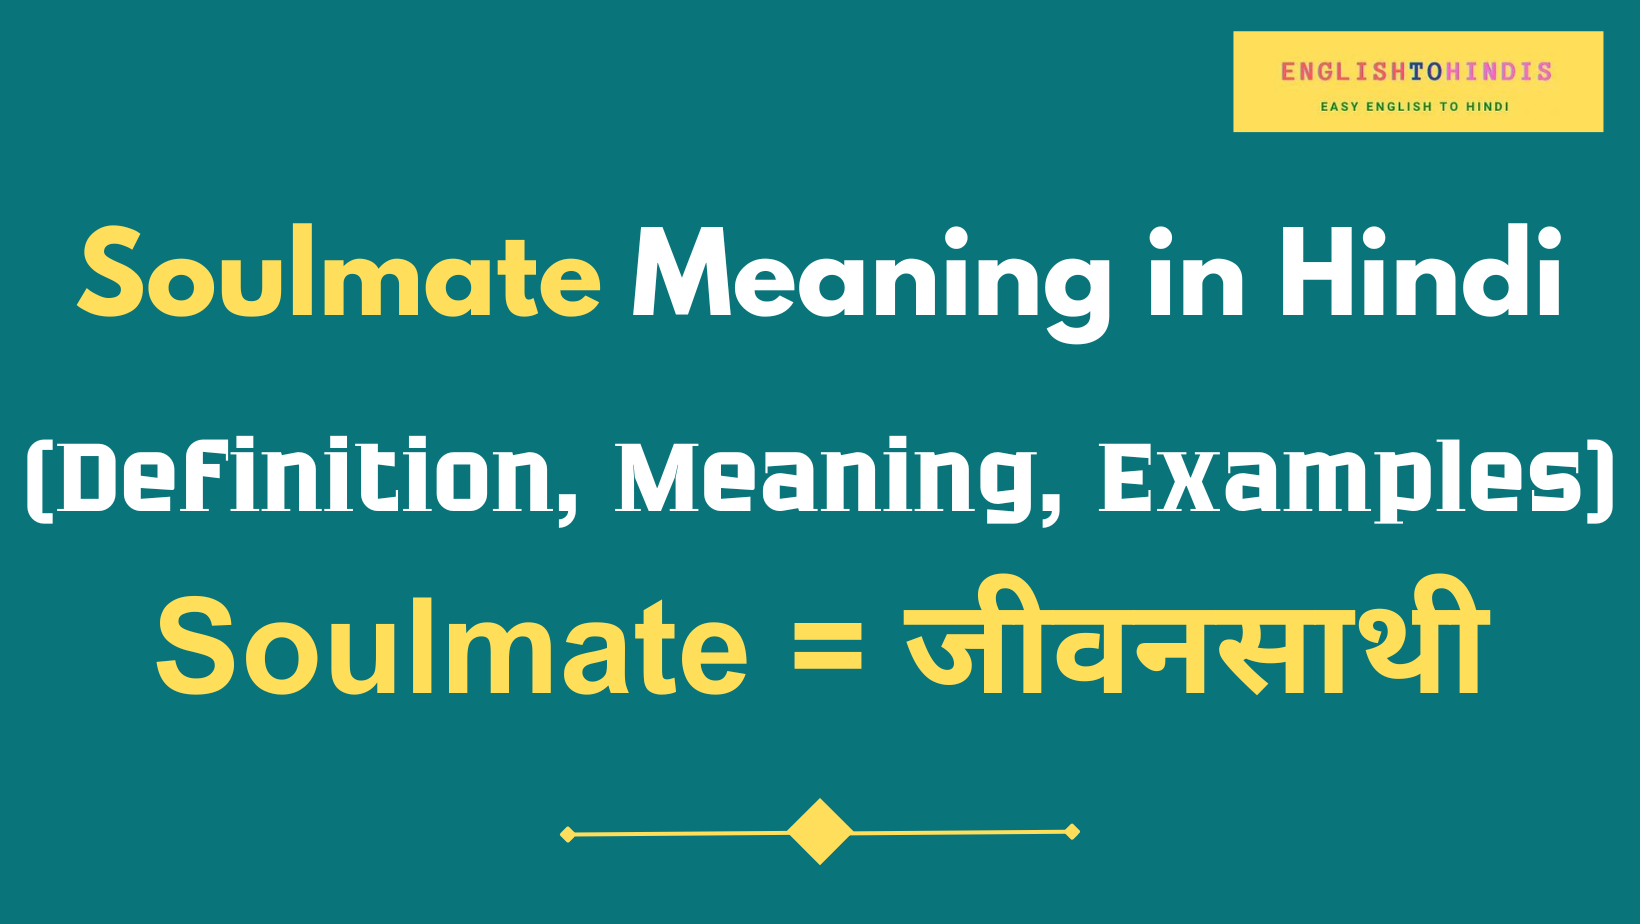 Soulmate Meaning in Hindi